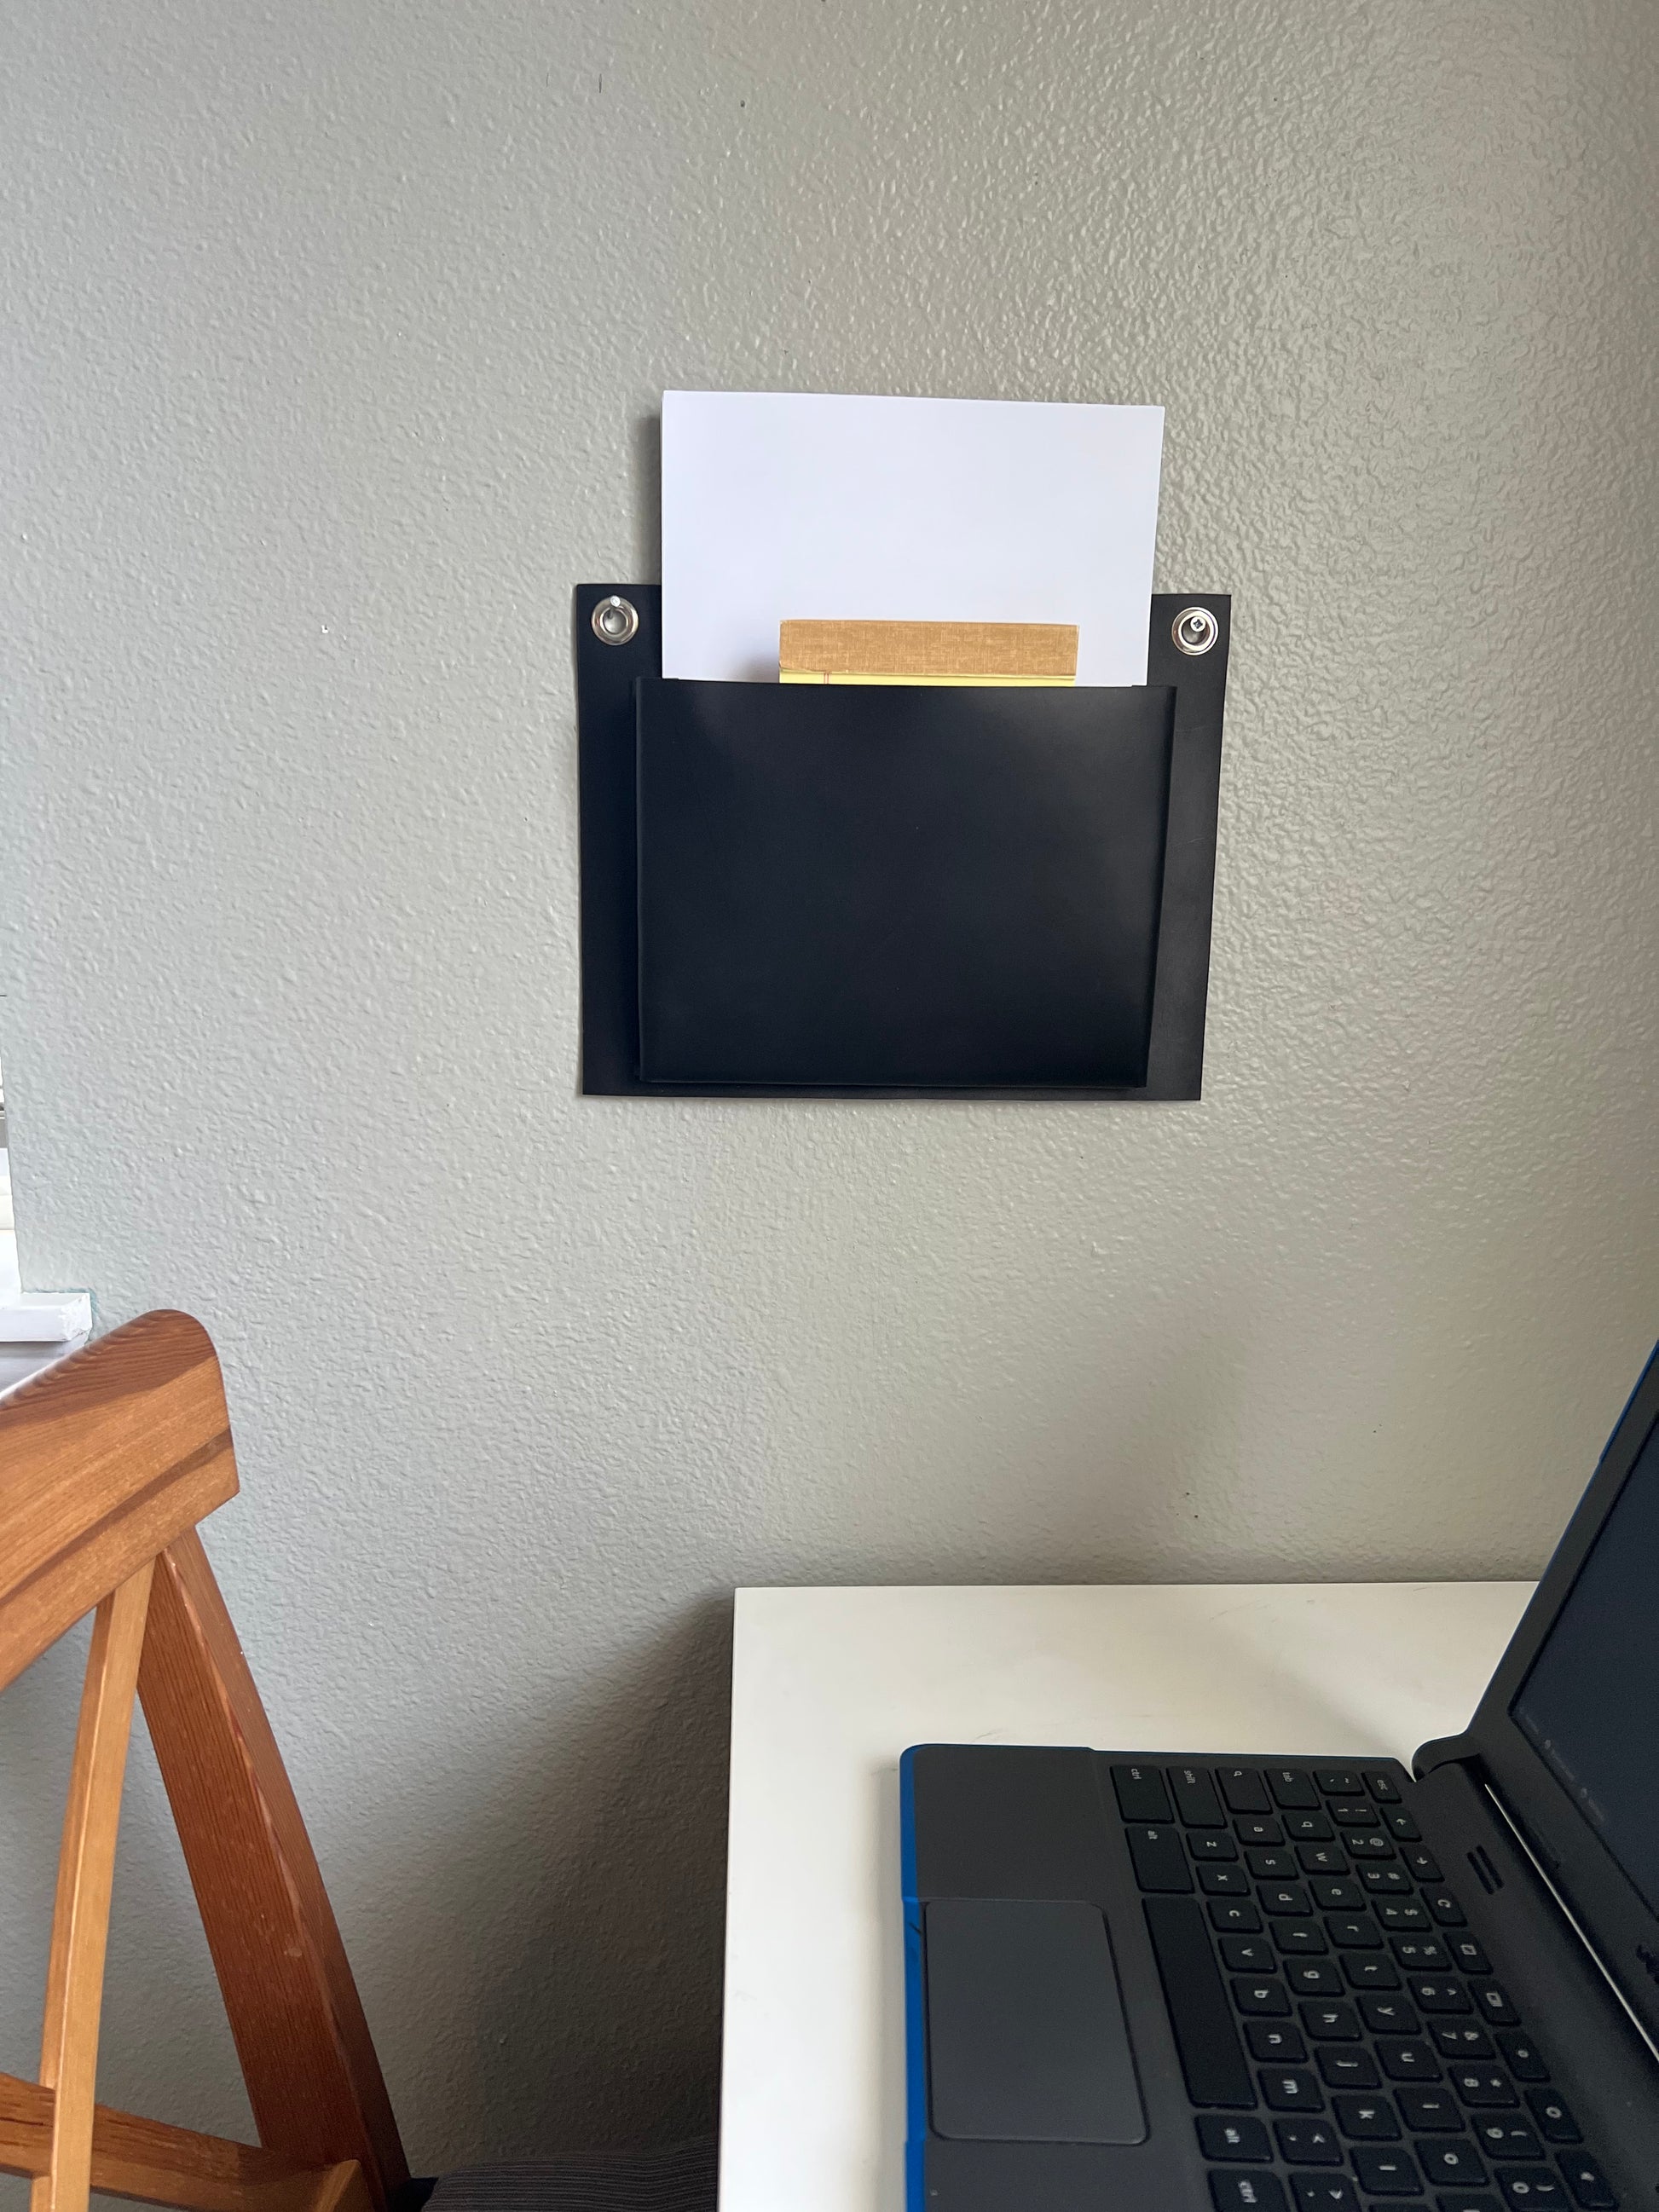 Black leather wall pocket hangs above a clean and simple desk.